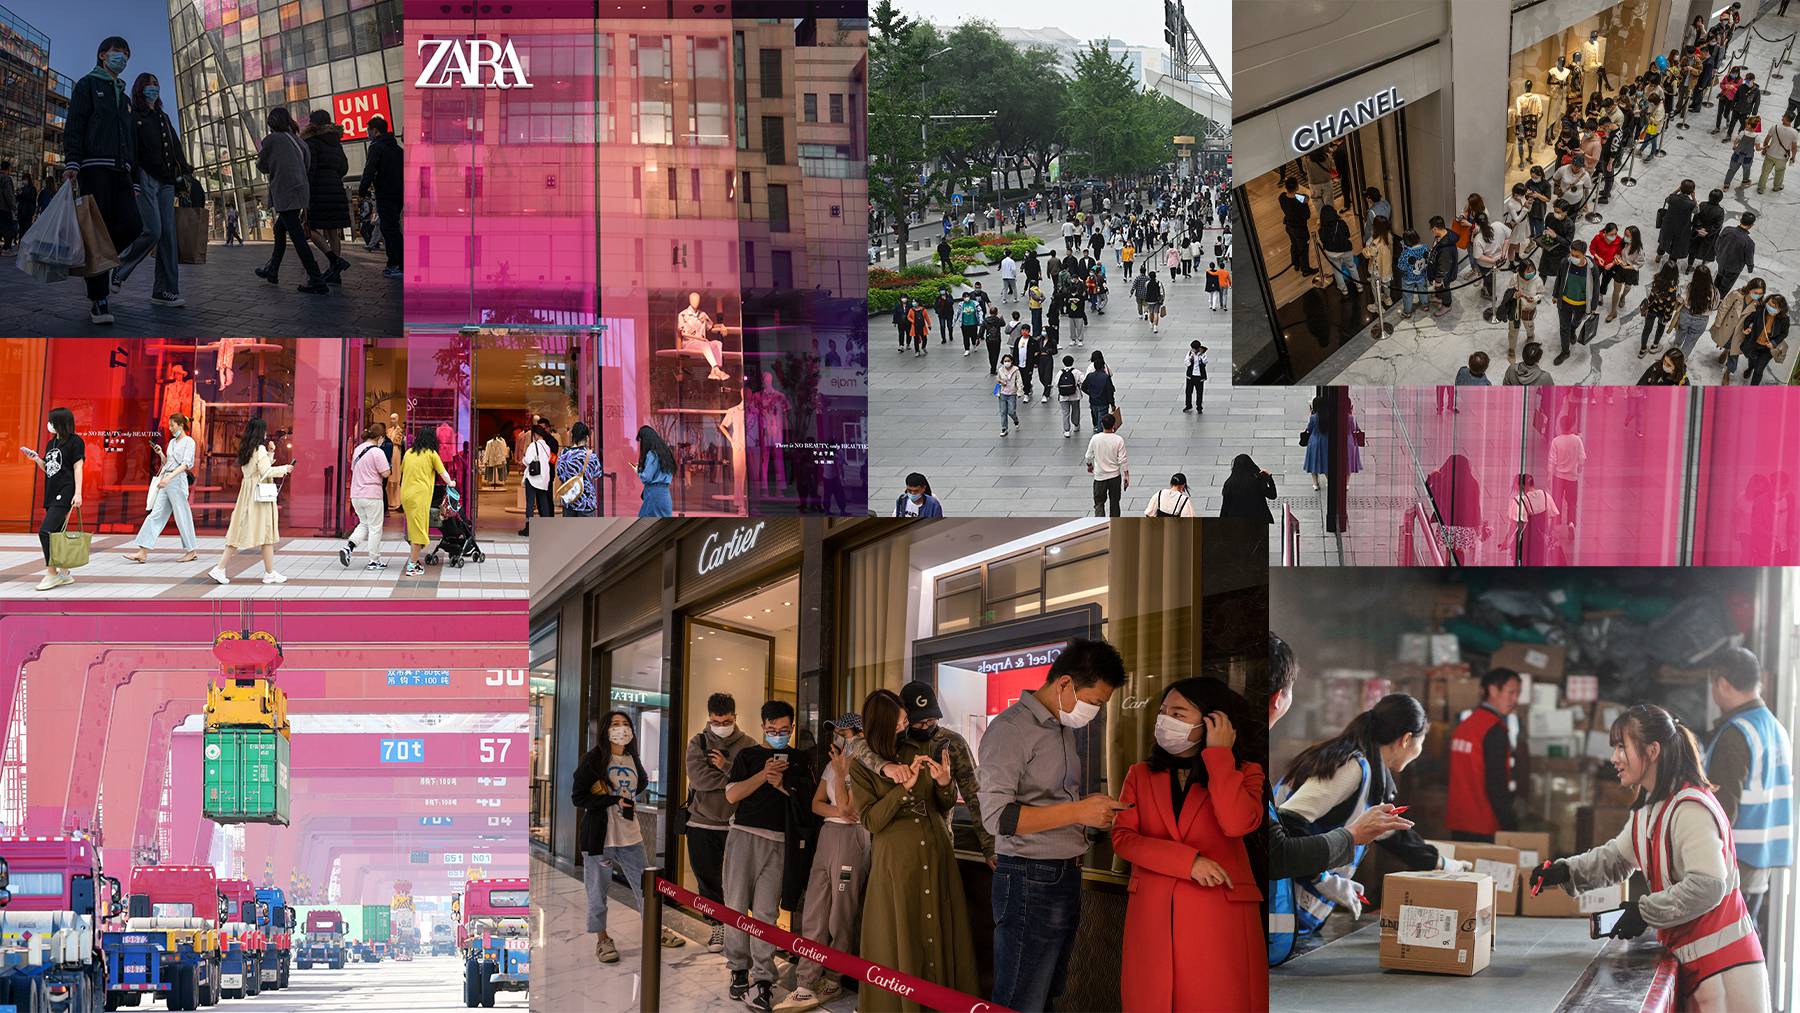 Chinese brands, “common prosperity” and a variety of controversies all made their mark on the world’s largest fashion and luxury market in 2021.